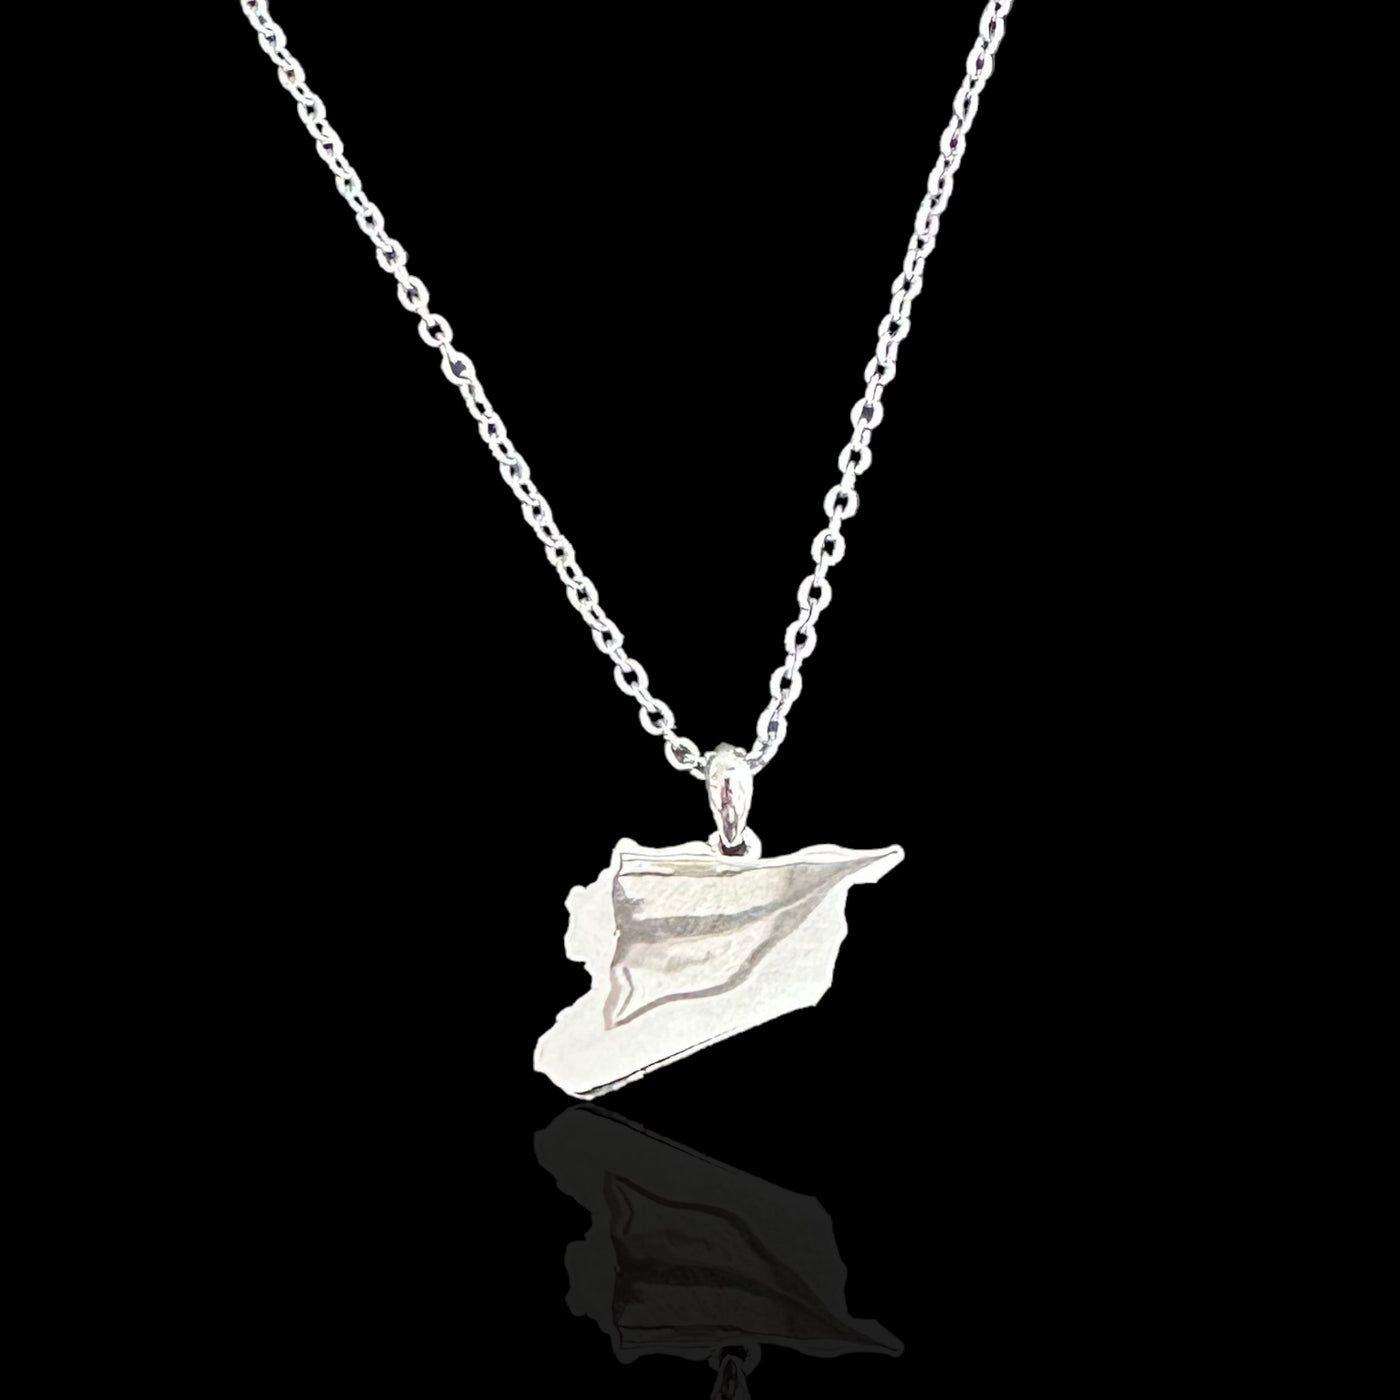 Sterling Silver Syria Map Necklace - Available in 3 Colors